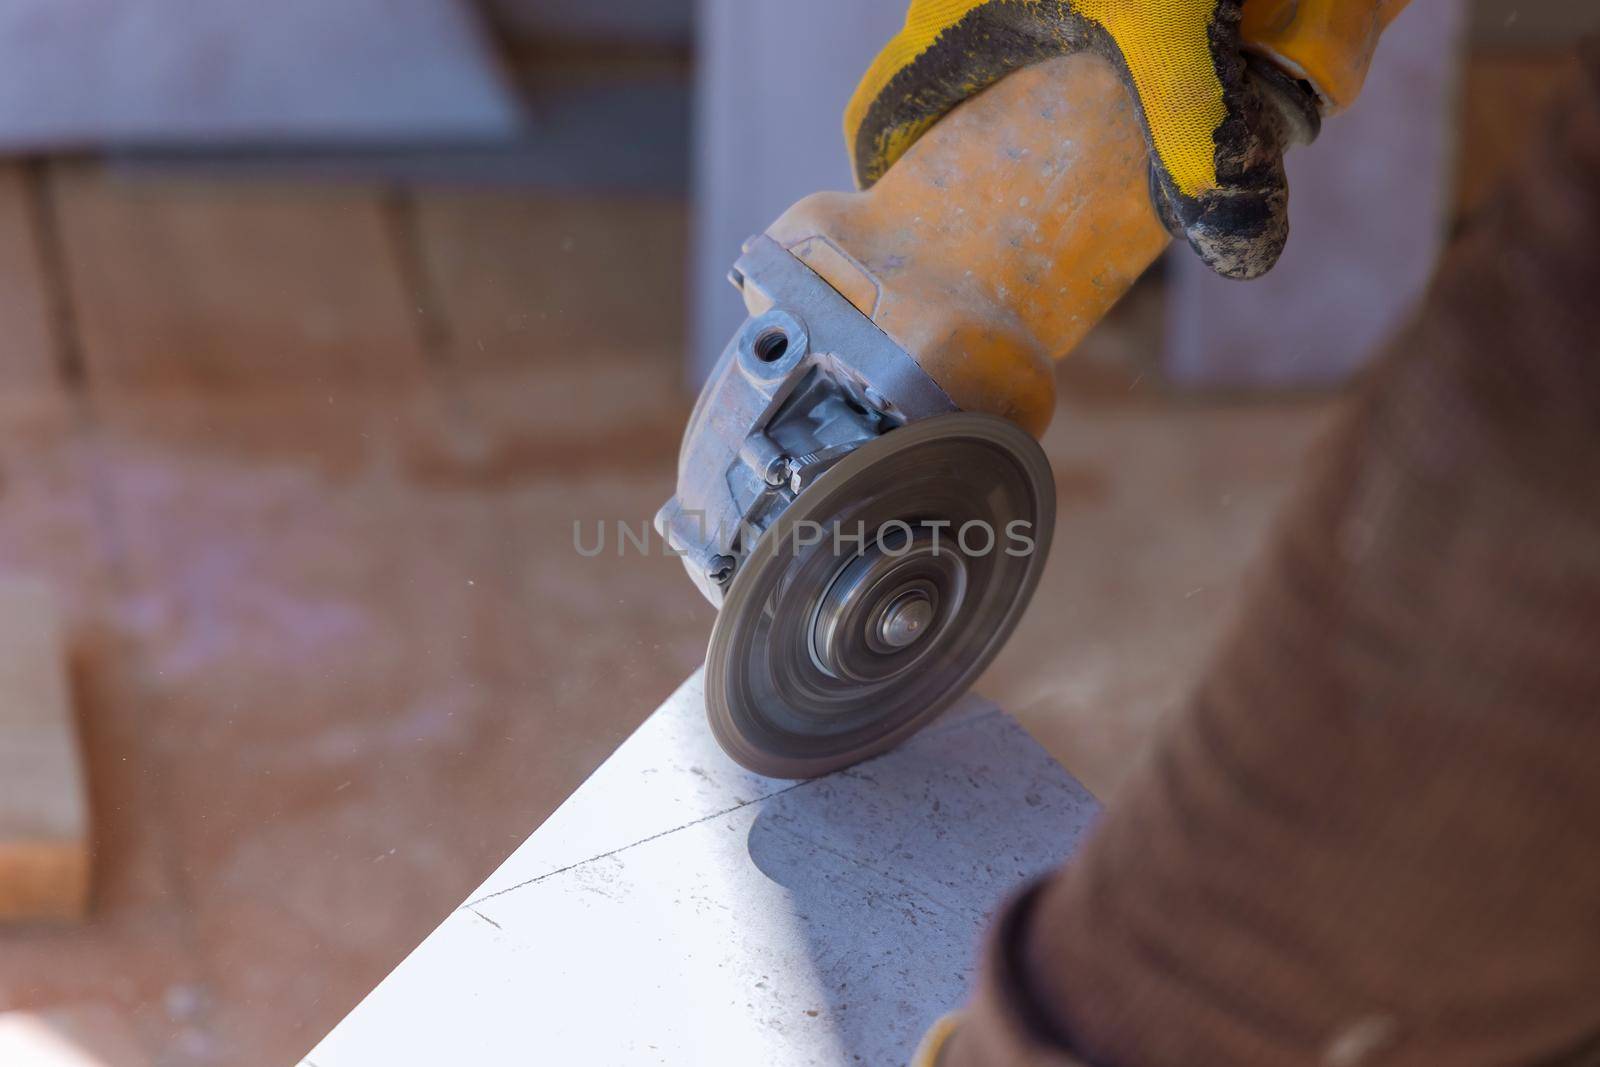 A man is cutting a floor ceramic tile with an circular saw